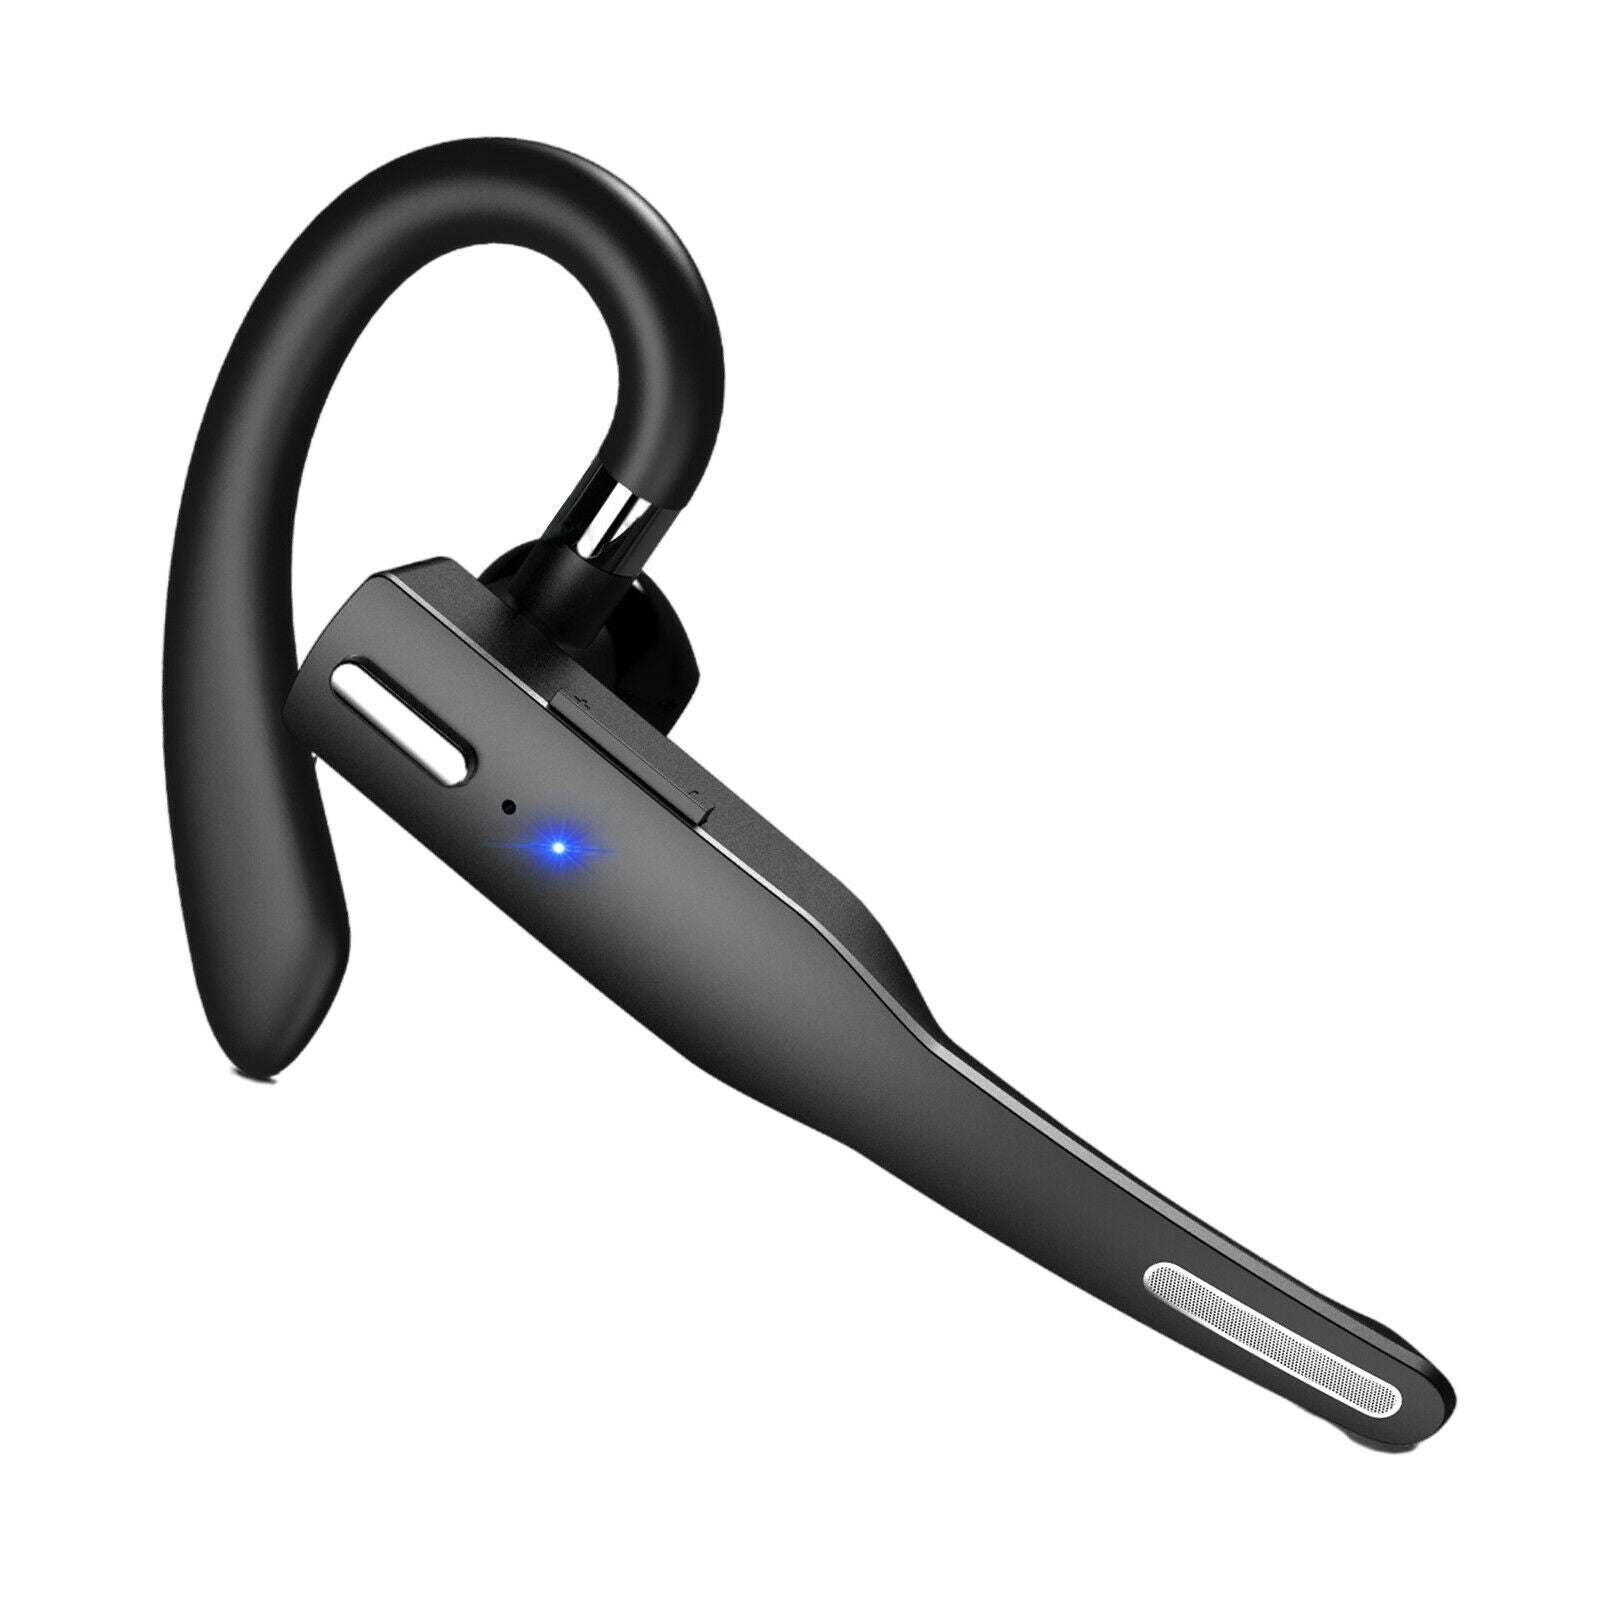 Bluetooth Earpiece V5.0 Hands-Free Headset for Cellphones Driving Business